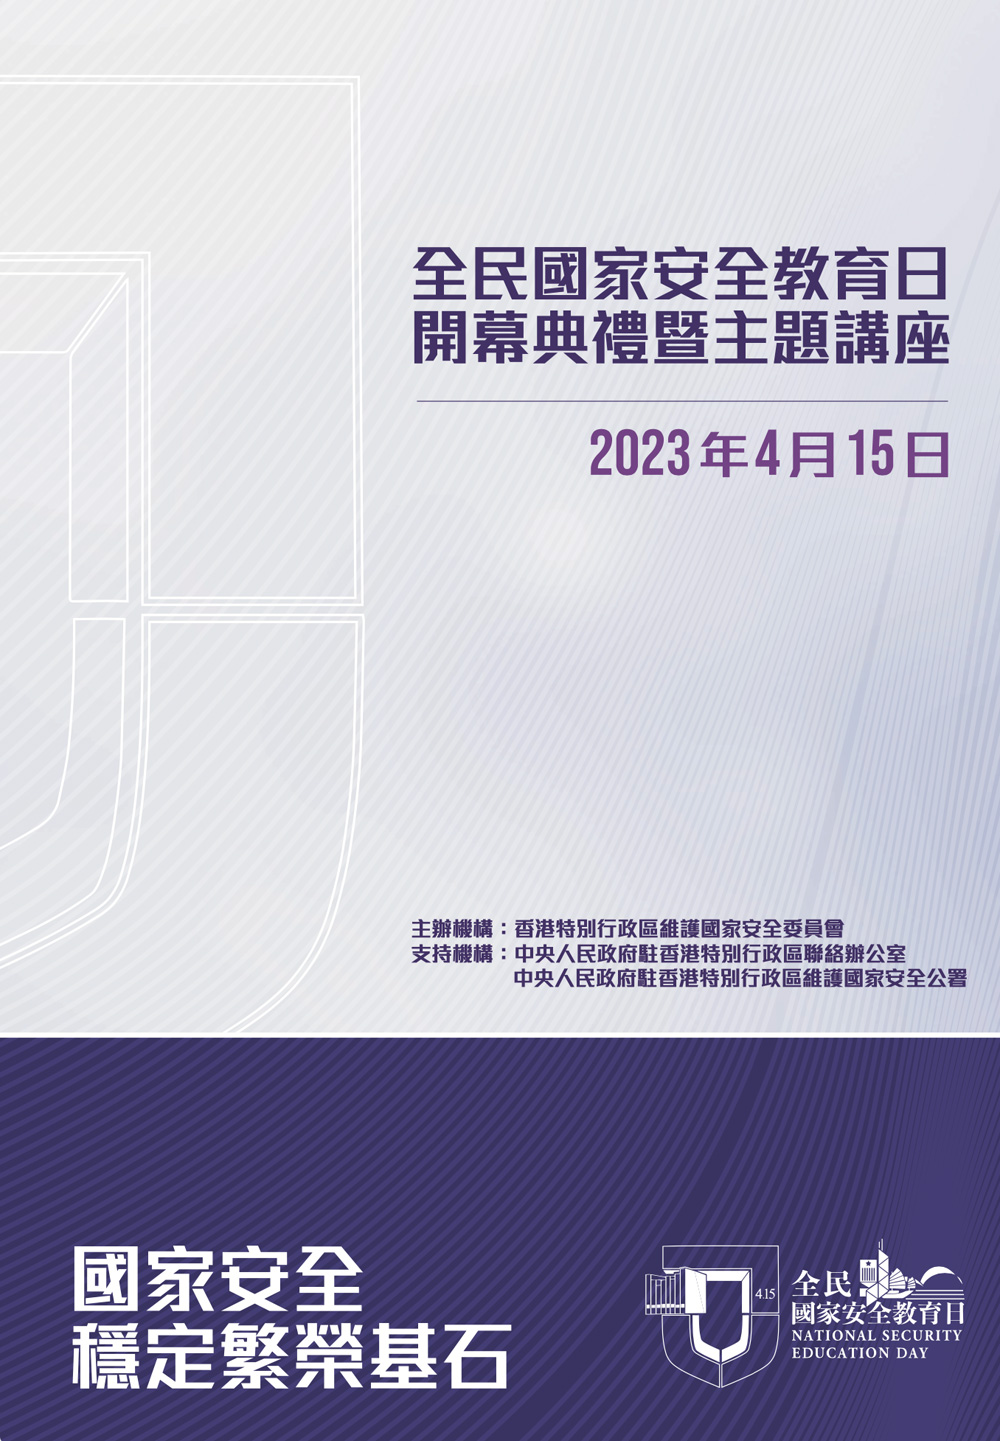 <span>2023年4月15日開幕典禮暨主題講座特刊<img class='ml-5' src='/assets/images/svg/icon_new.svg' style='max-width: 30px;' ></span>